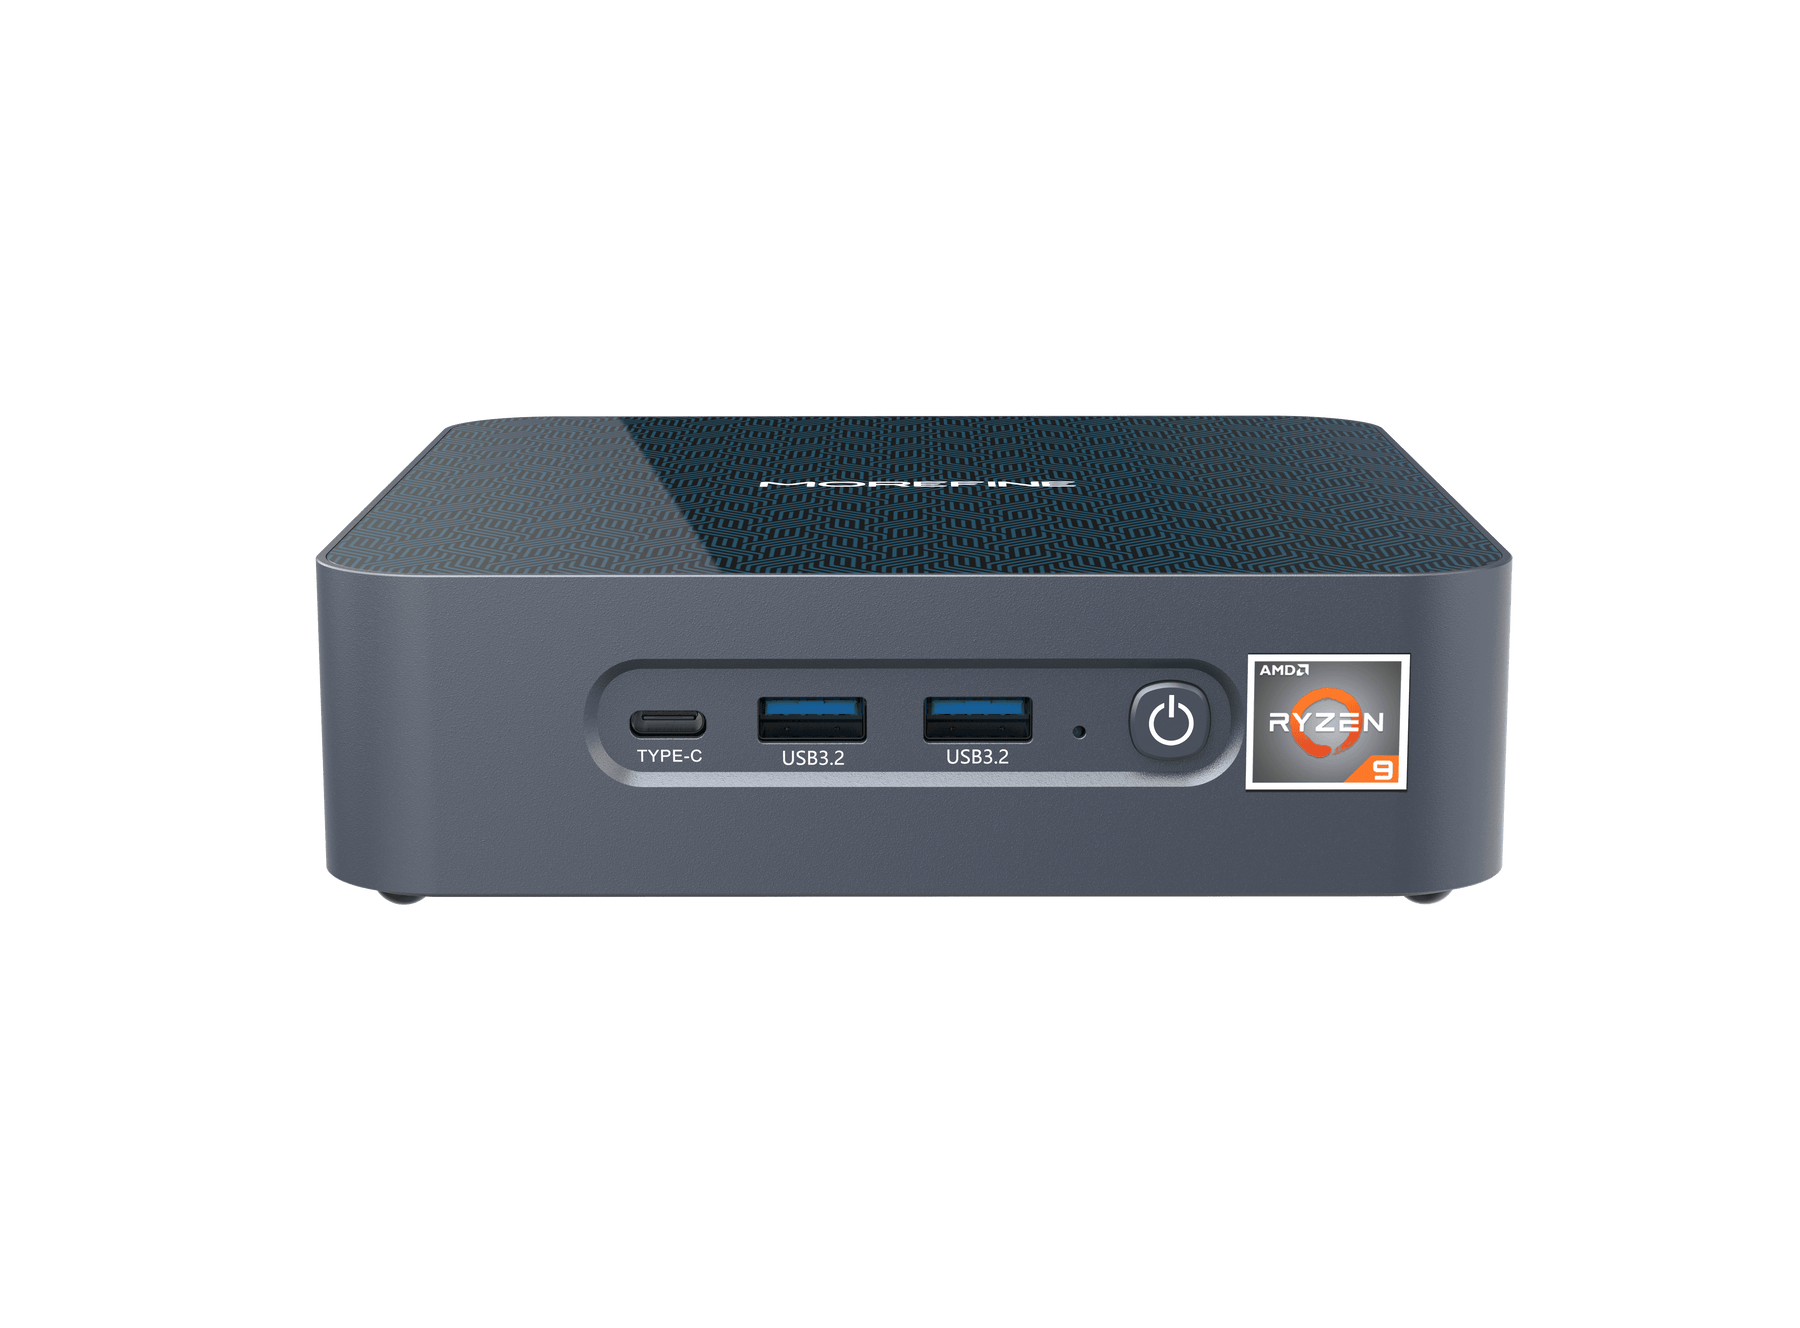  S500+ provides a large array of connectivity and expandability options both inside and out.